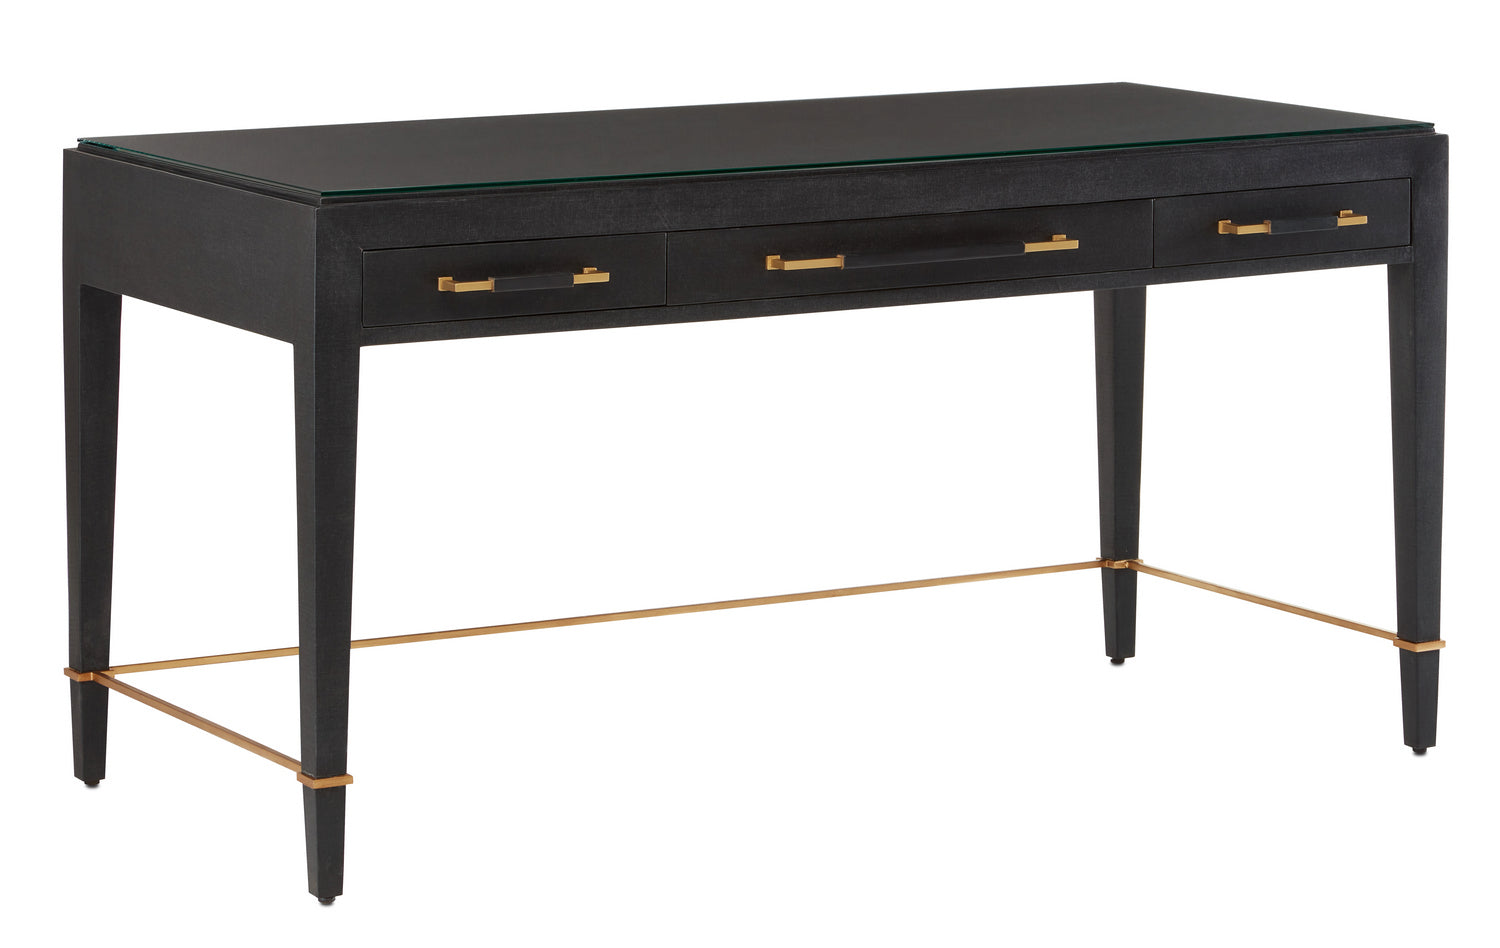 Desk from the Verona collection in Black Lacquered Linen/Champagne Metal finish